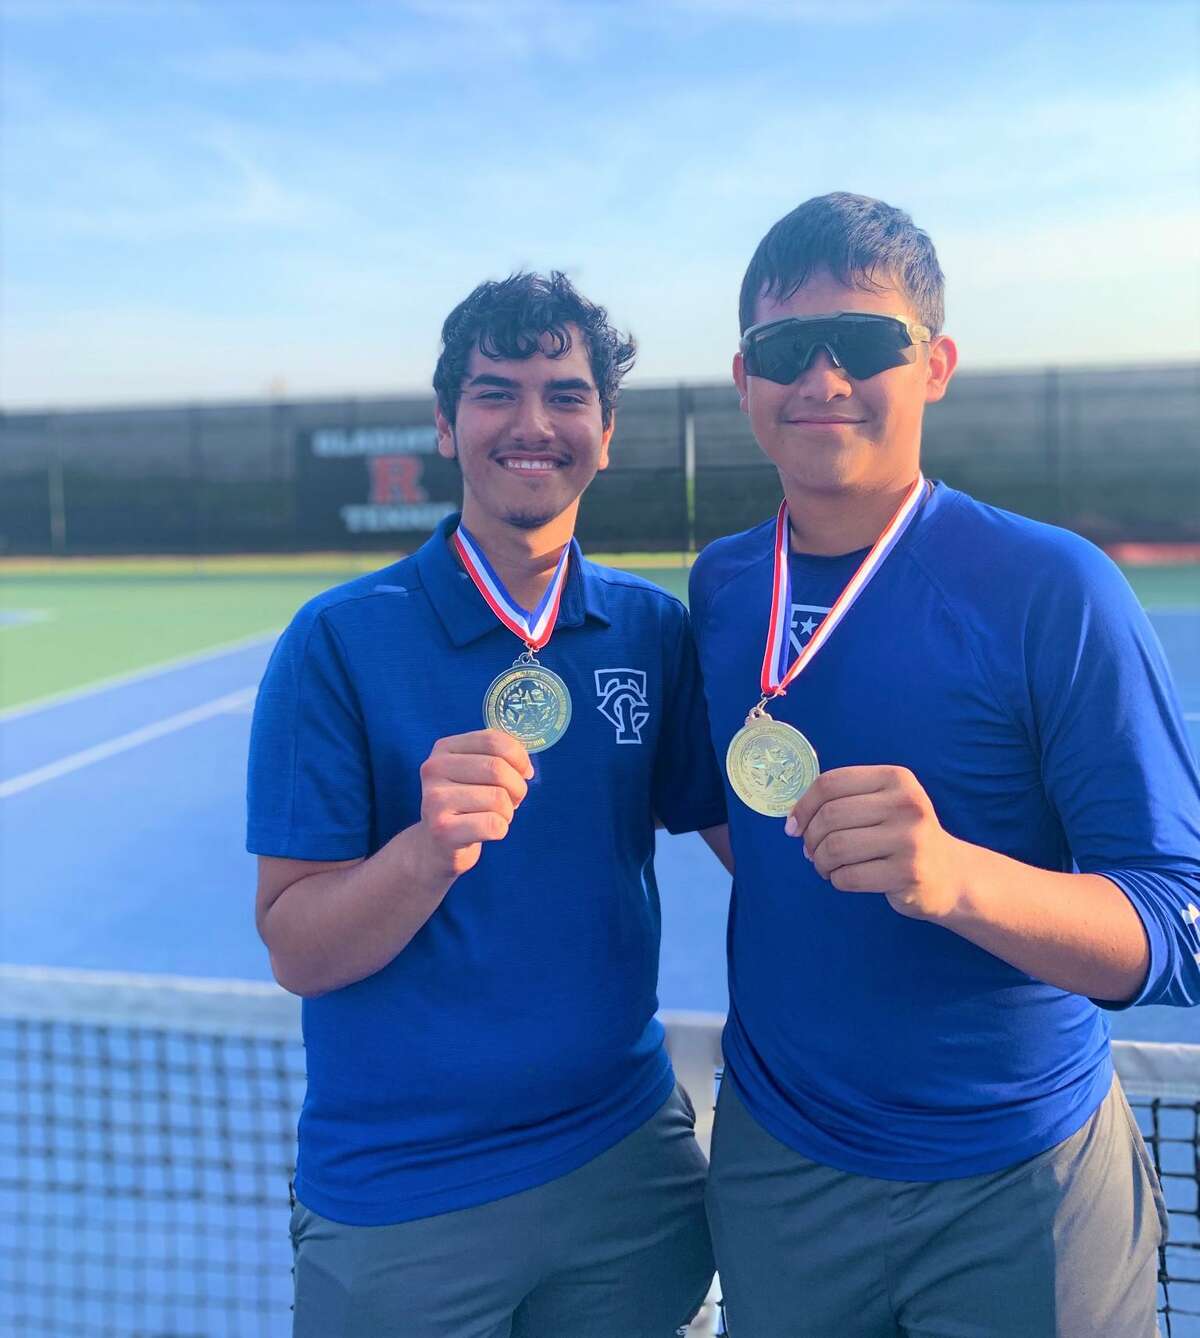 Senior Mark Gutierrez and junior Lethan Solis became the boys’ doubles District 30-5A champions and qualified for the regional tournament in San Antonio on April 12-13.